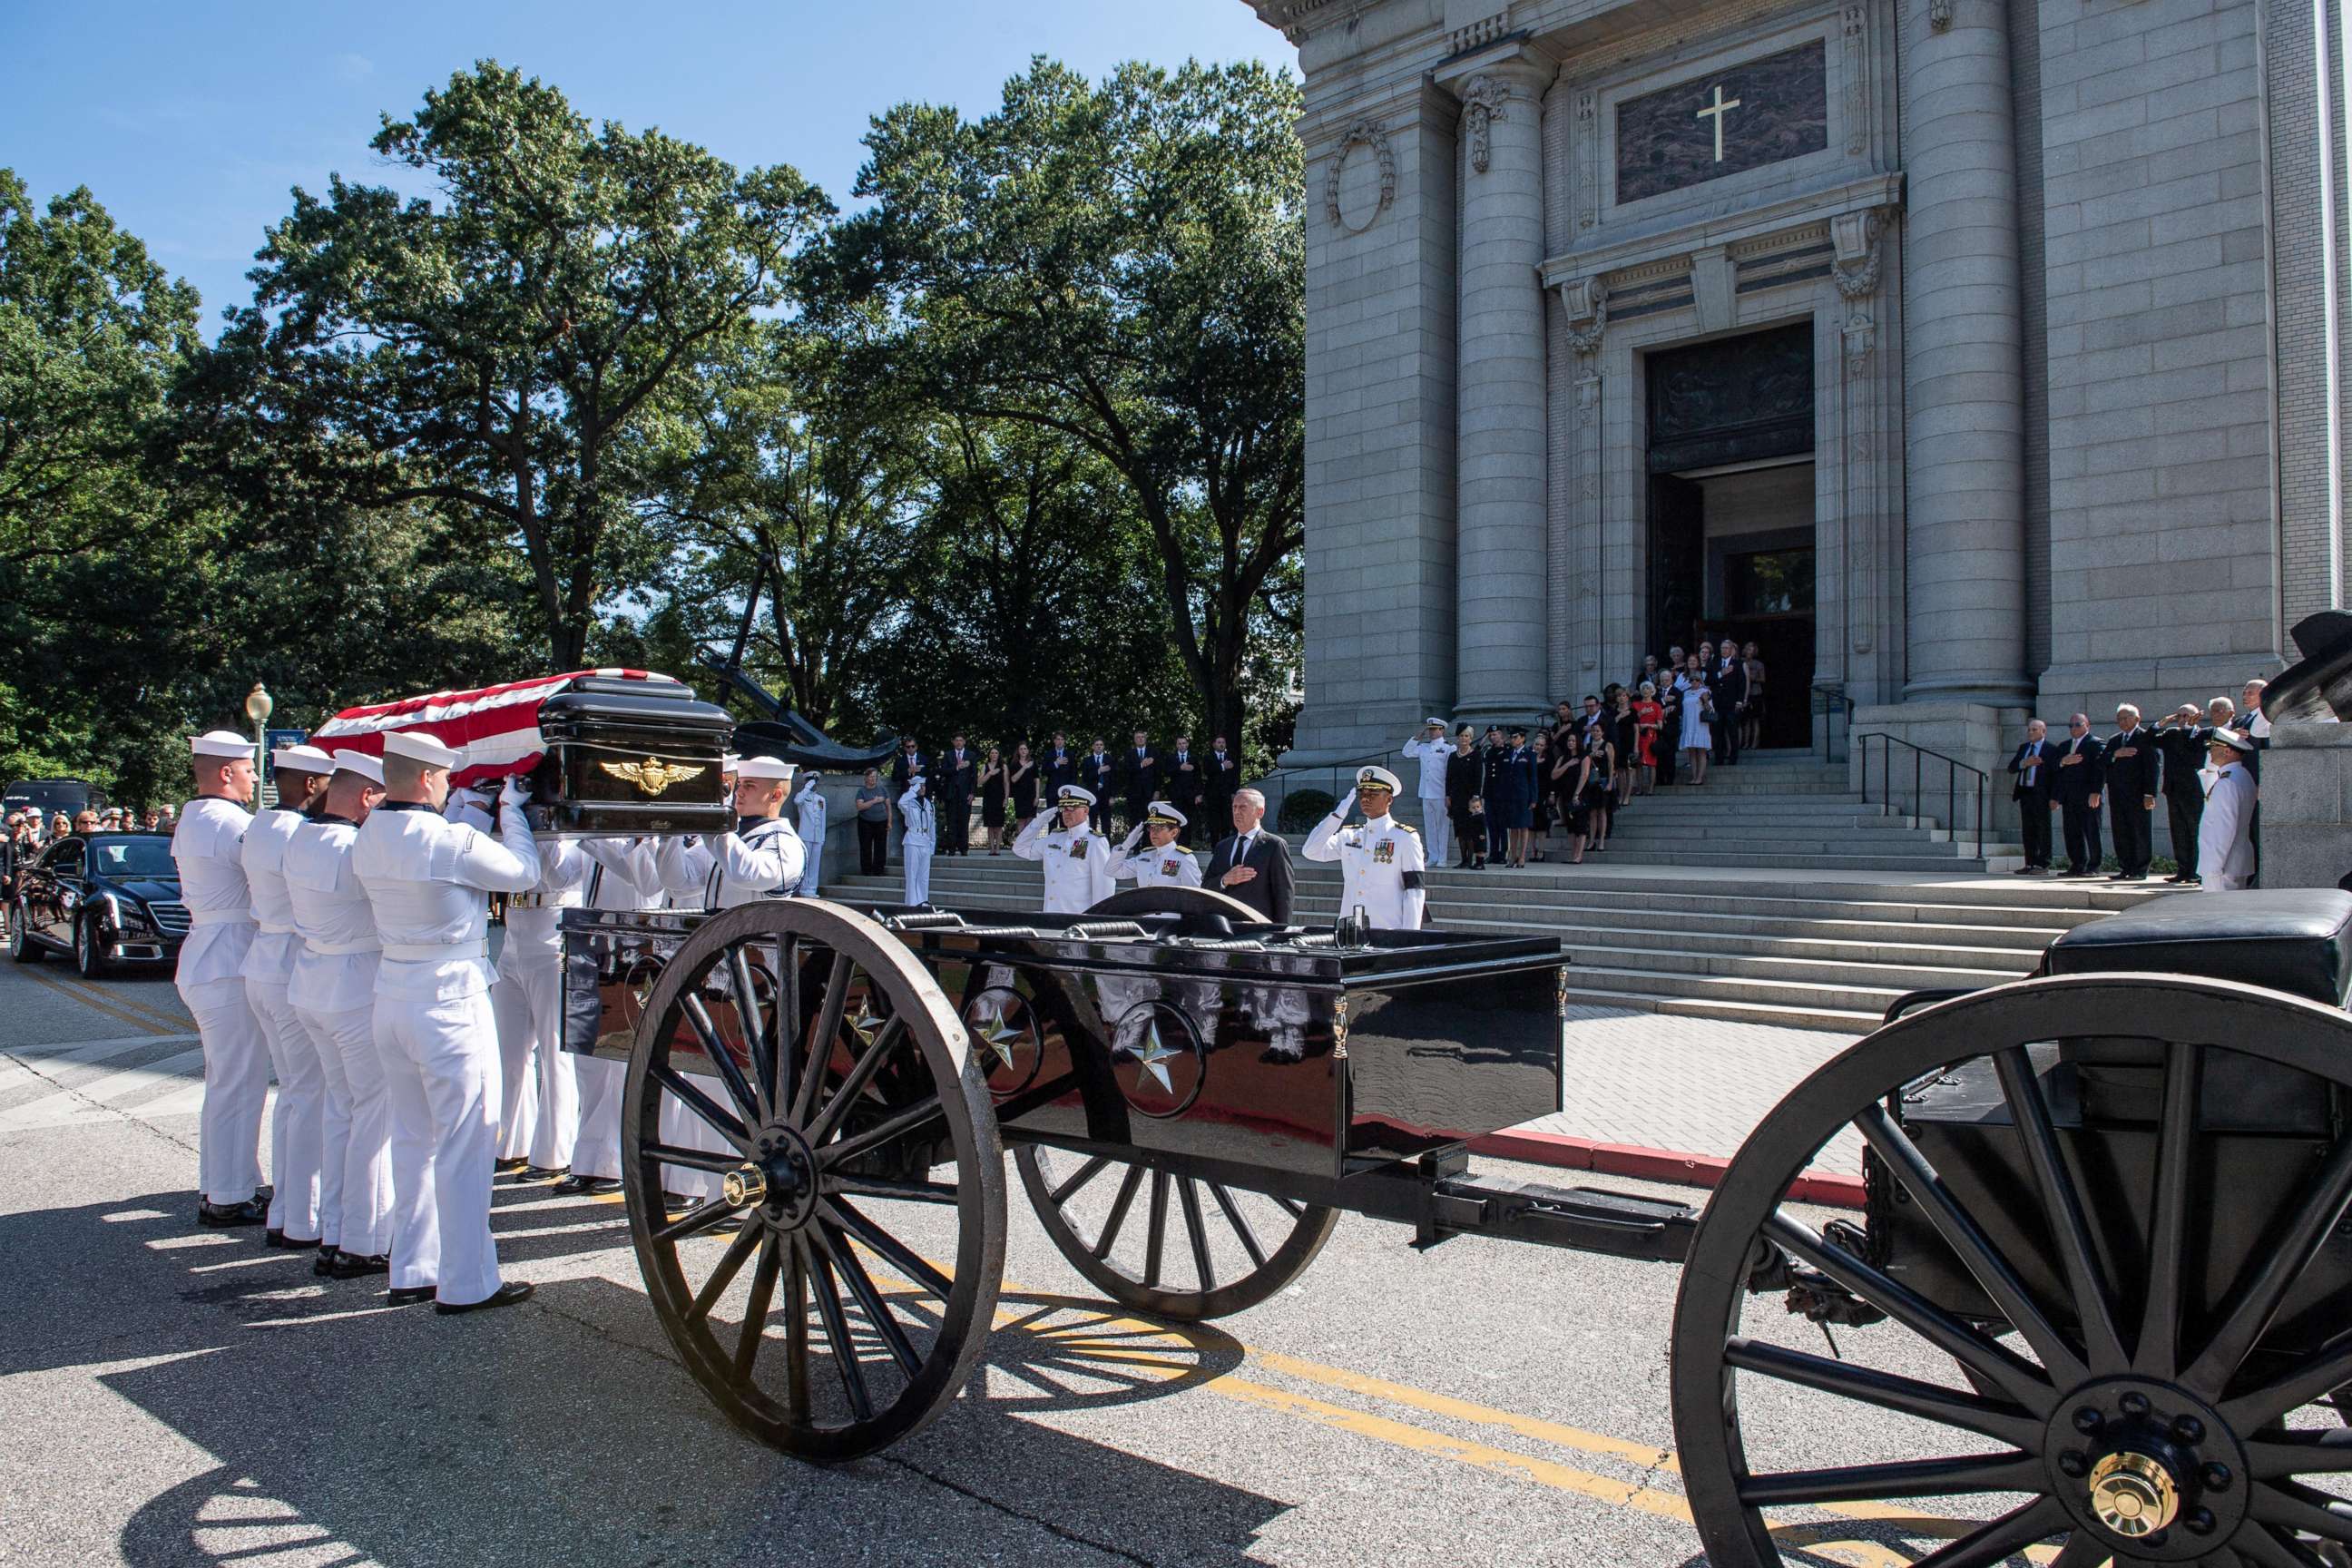 Navy Body Bearers place the casket of the late Sen. John McCain onto a horse-drawn caisson after his funeral service at the United States Naval Academy Chapel, Sept. 2, 2018. John Sidney McCain, III graduated from the United States Naval Academy in 1958. 